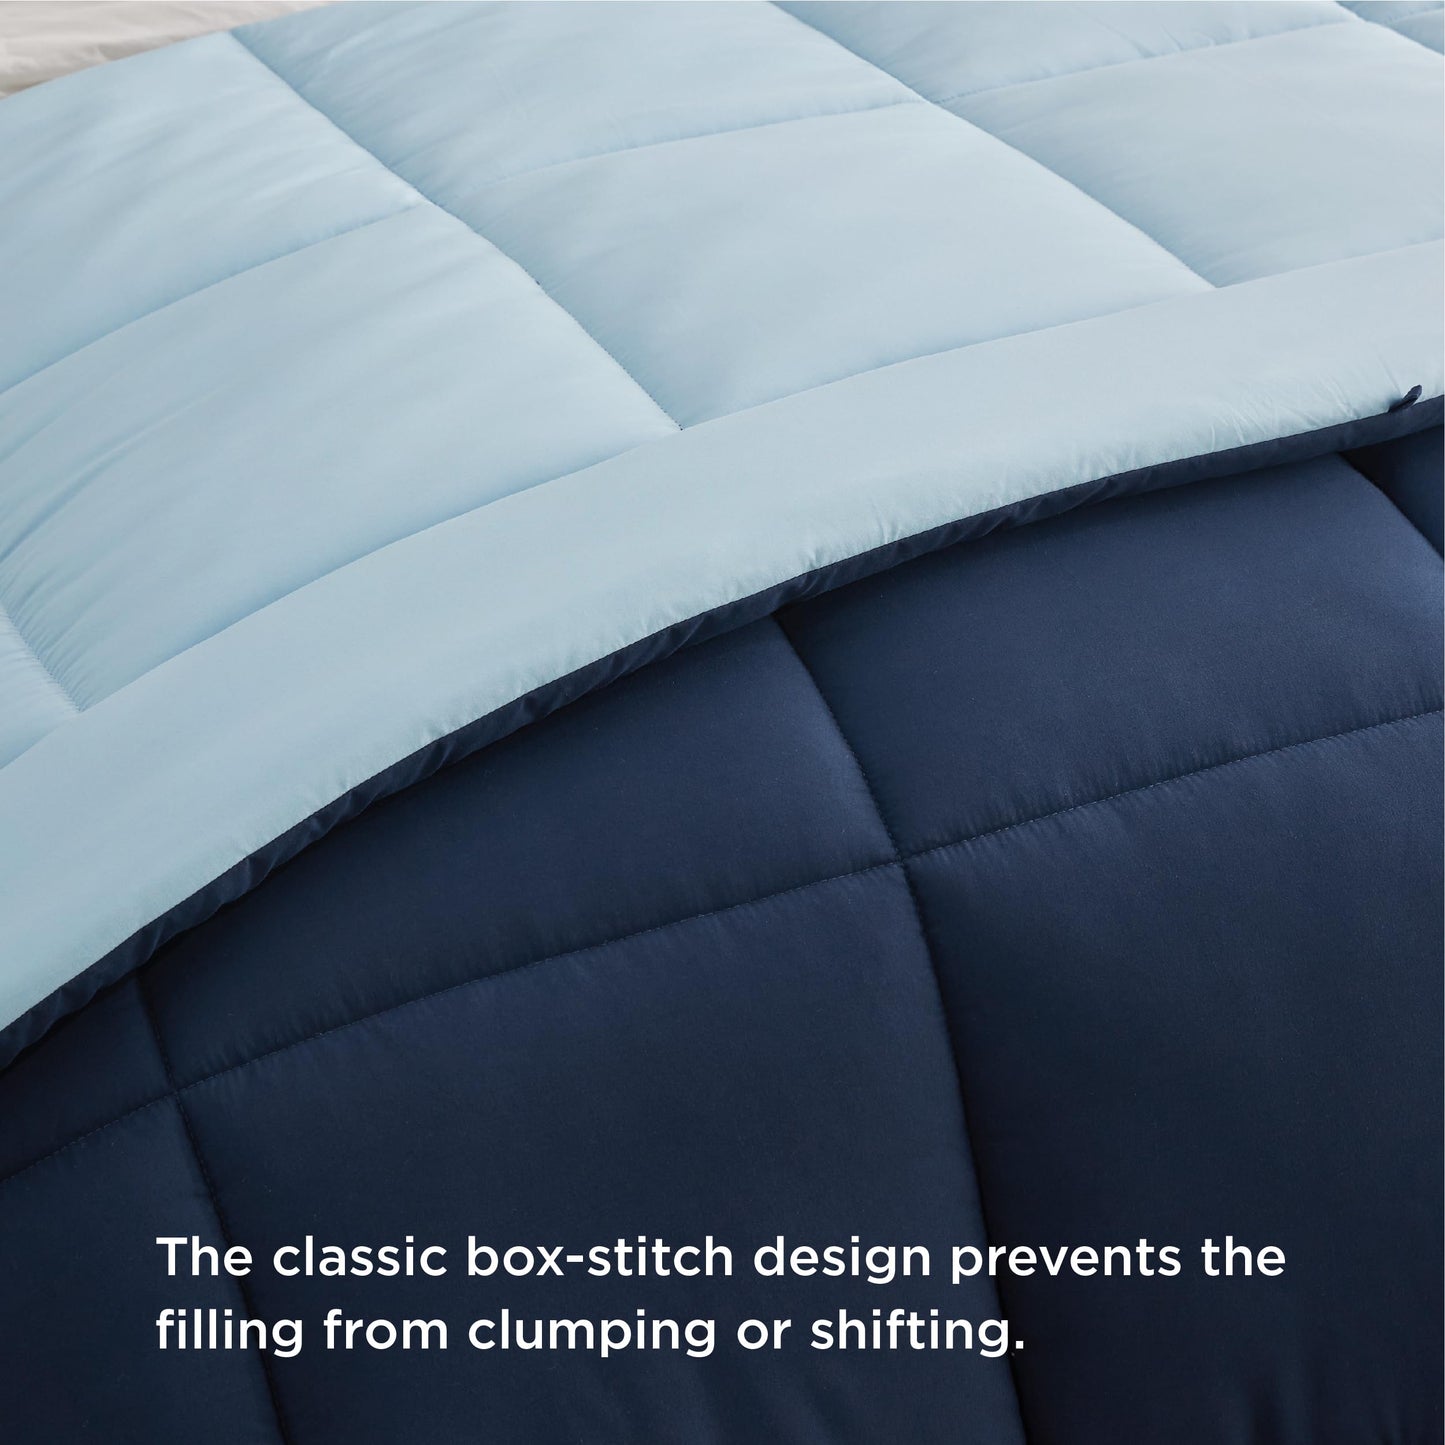 Bedsure Twin Reversible Comforter Duvet Insert - All Season Quilted Comforters Twin Size, Down Alternative Twin Size Bedding Comforter with Corner Tabs - Blue/Light Blue